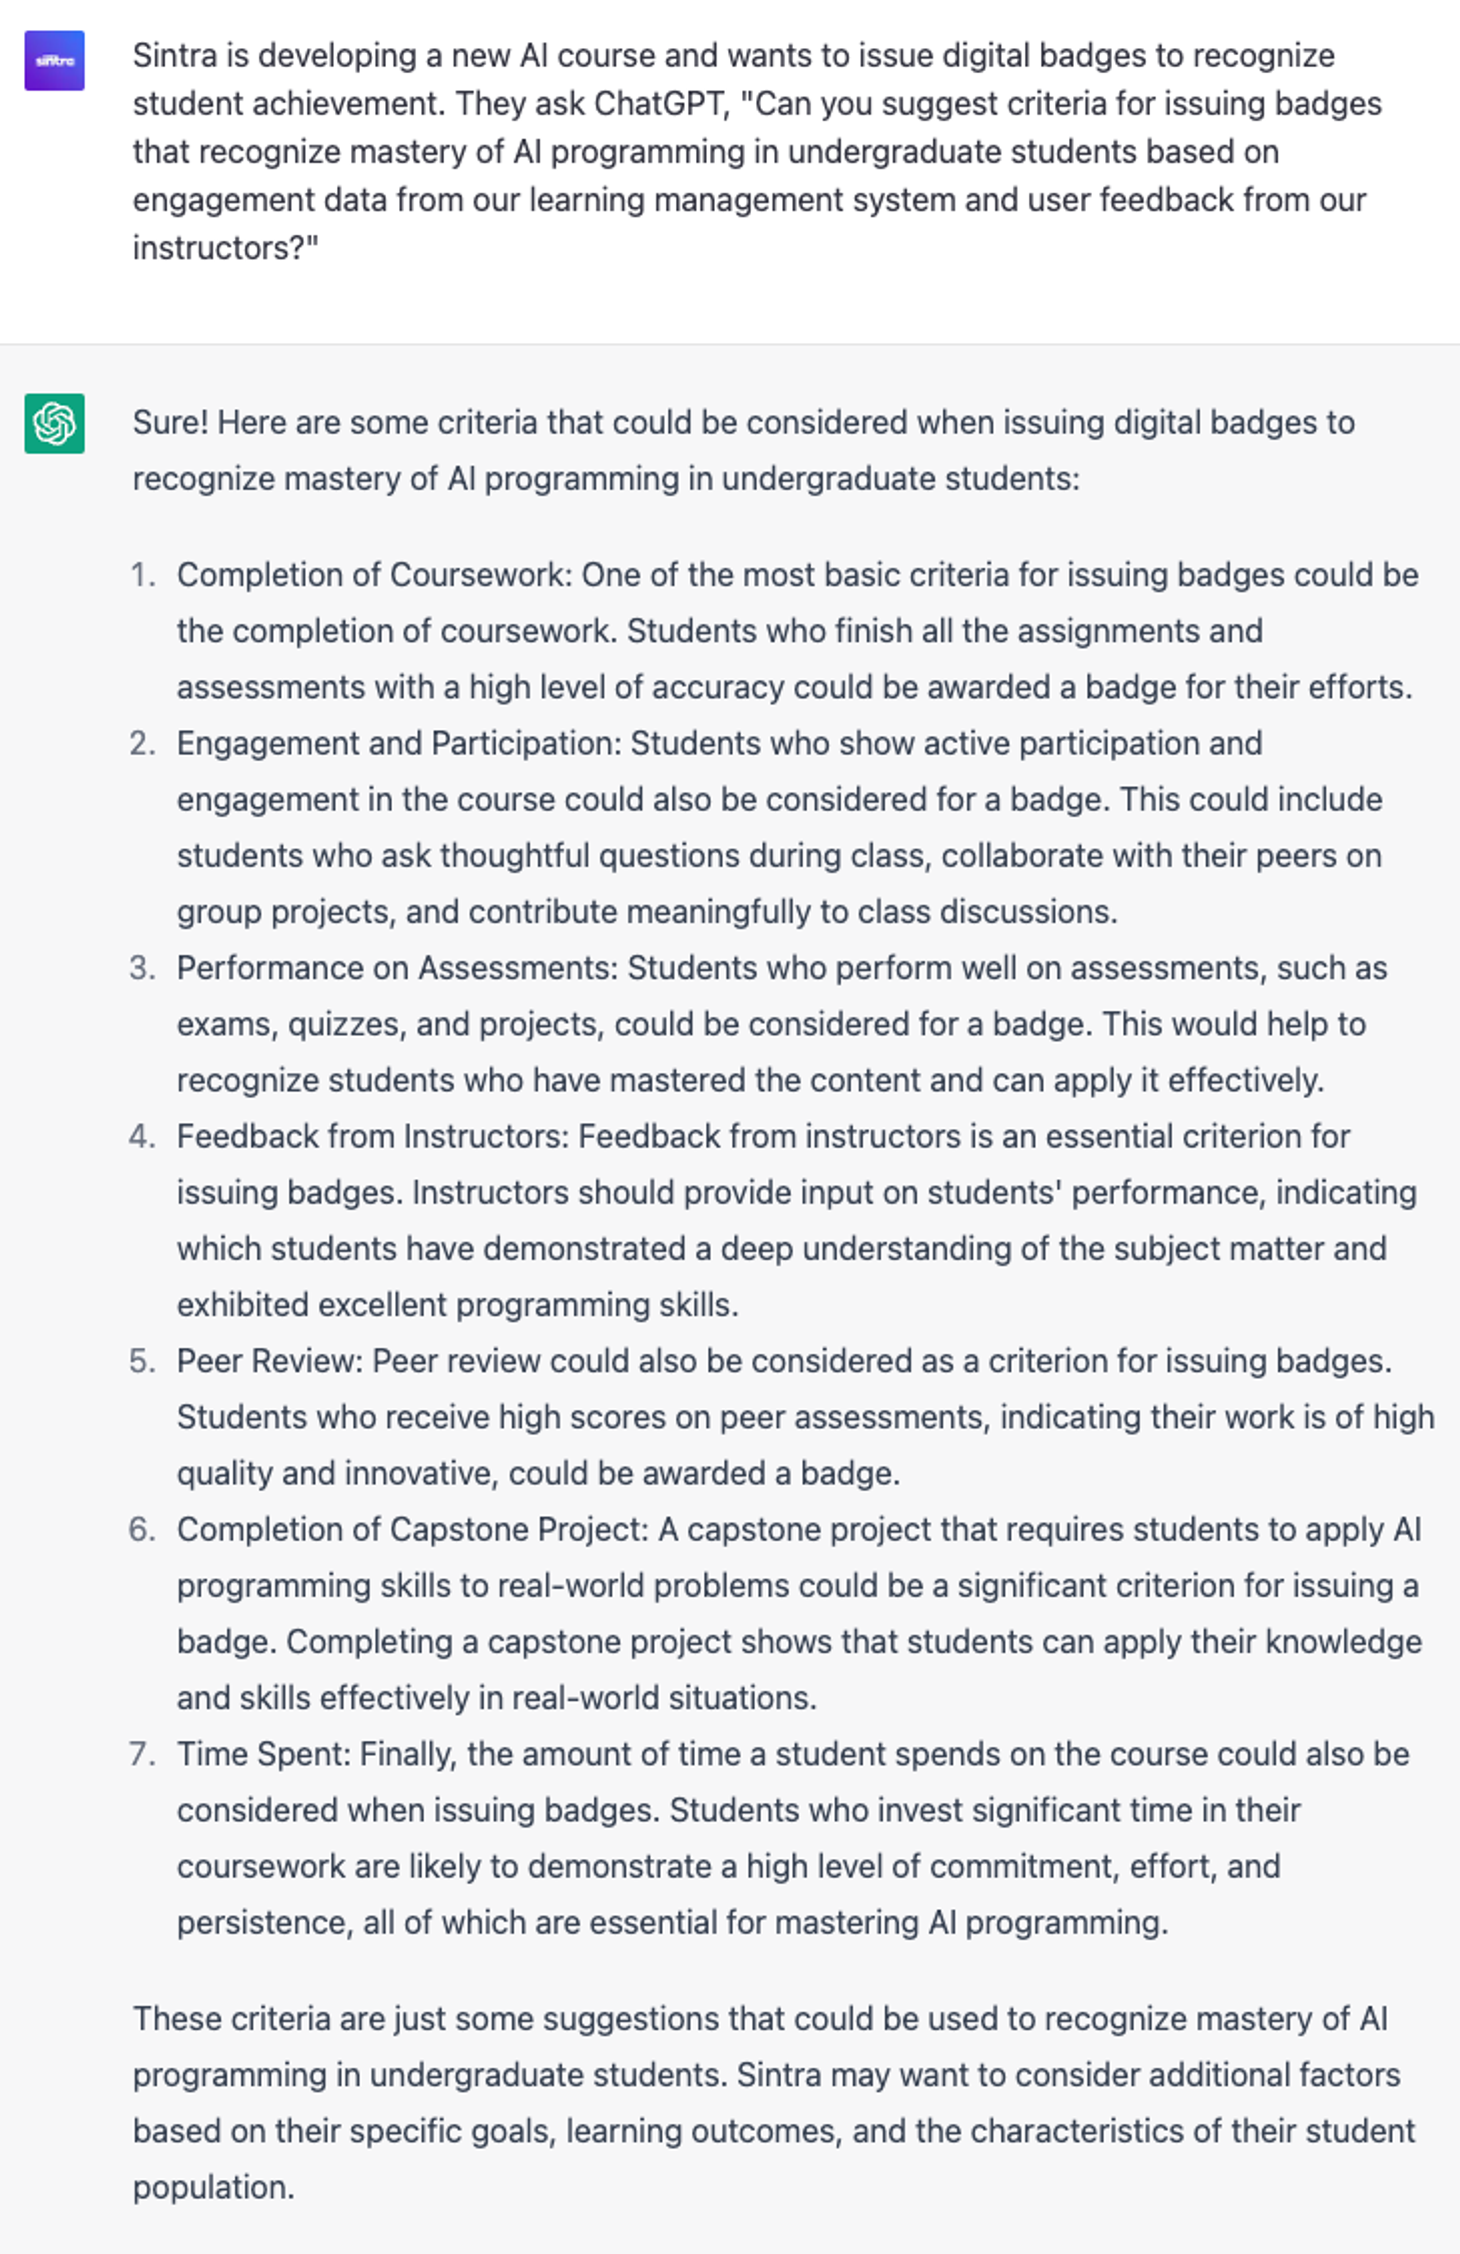  6 Strategic ChatGPT Prompts: Developing digital badges and credentials